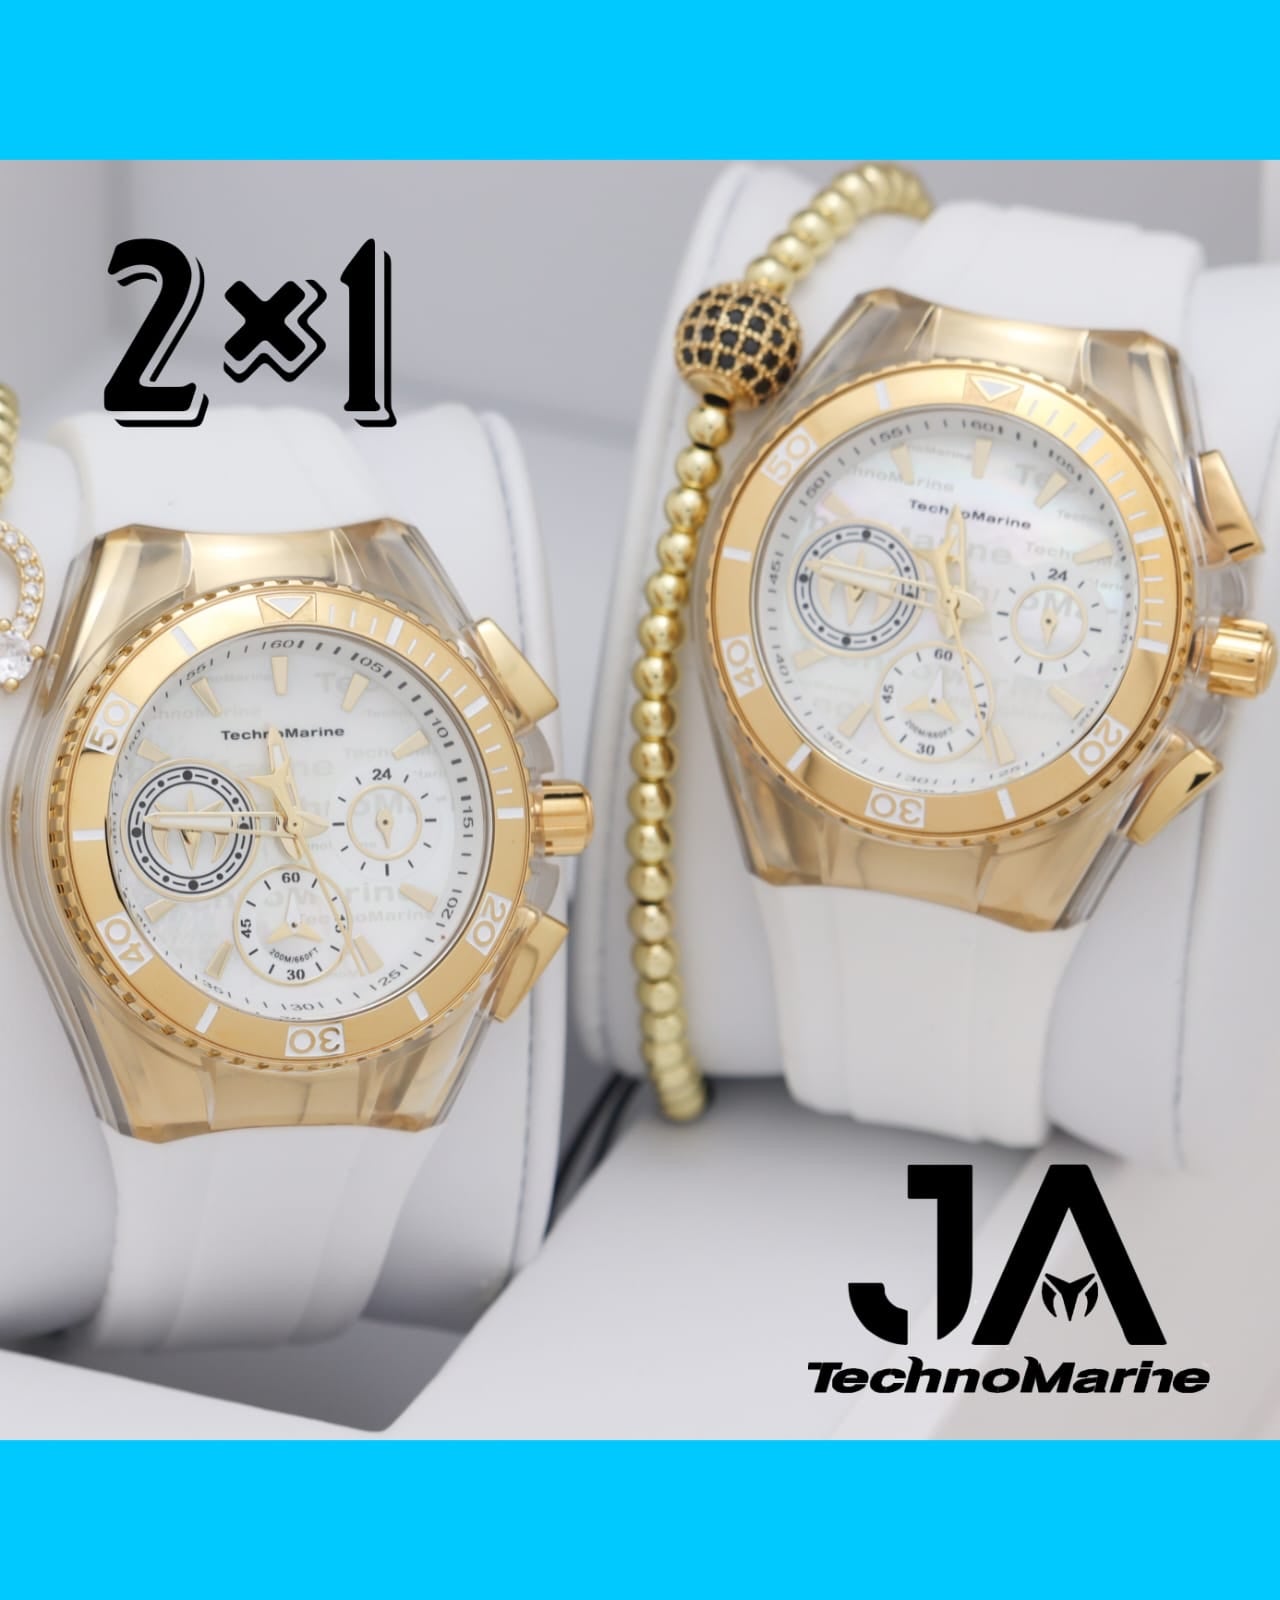 2 × 1 TechnoMarine Cruise California Women's Watch w/ Metal, Mother of Pearl & Oyster Dial - 40.57mm, White